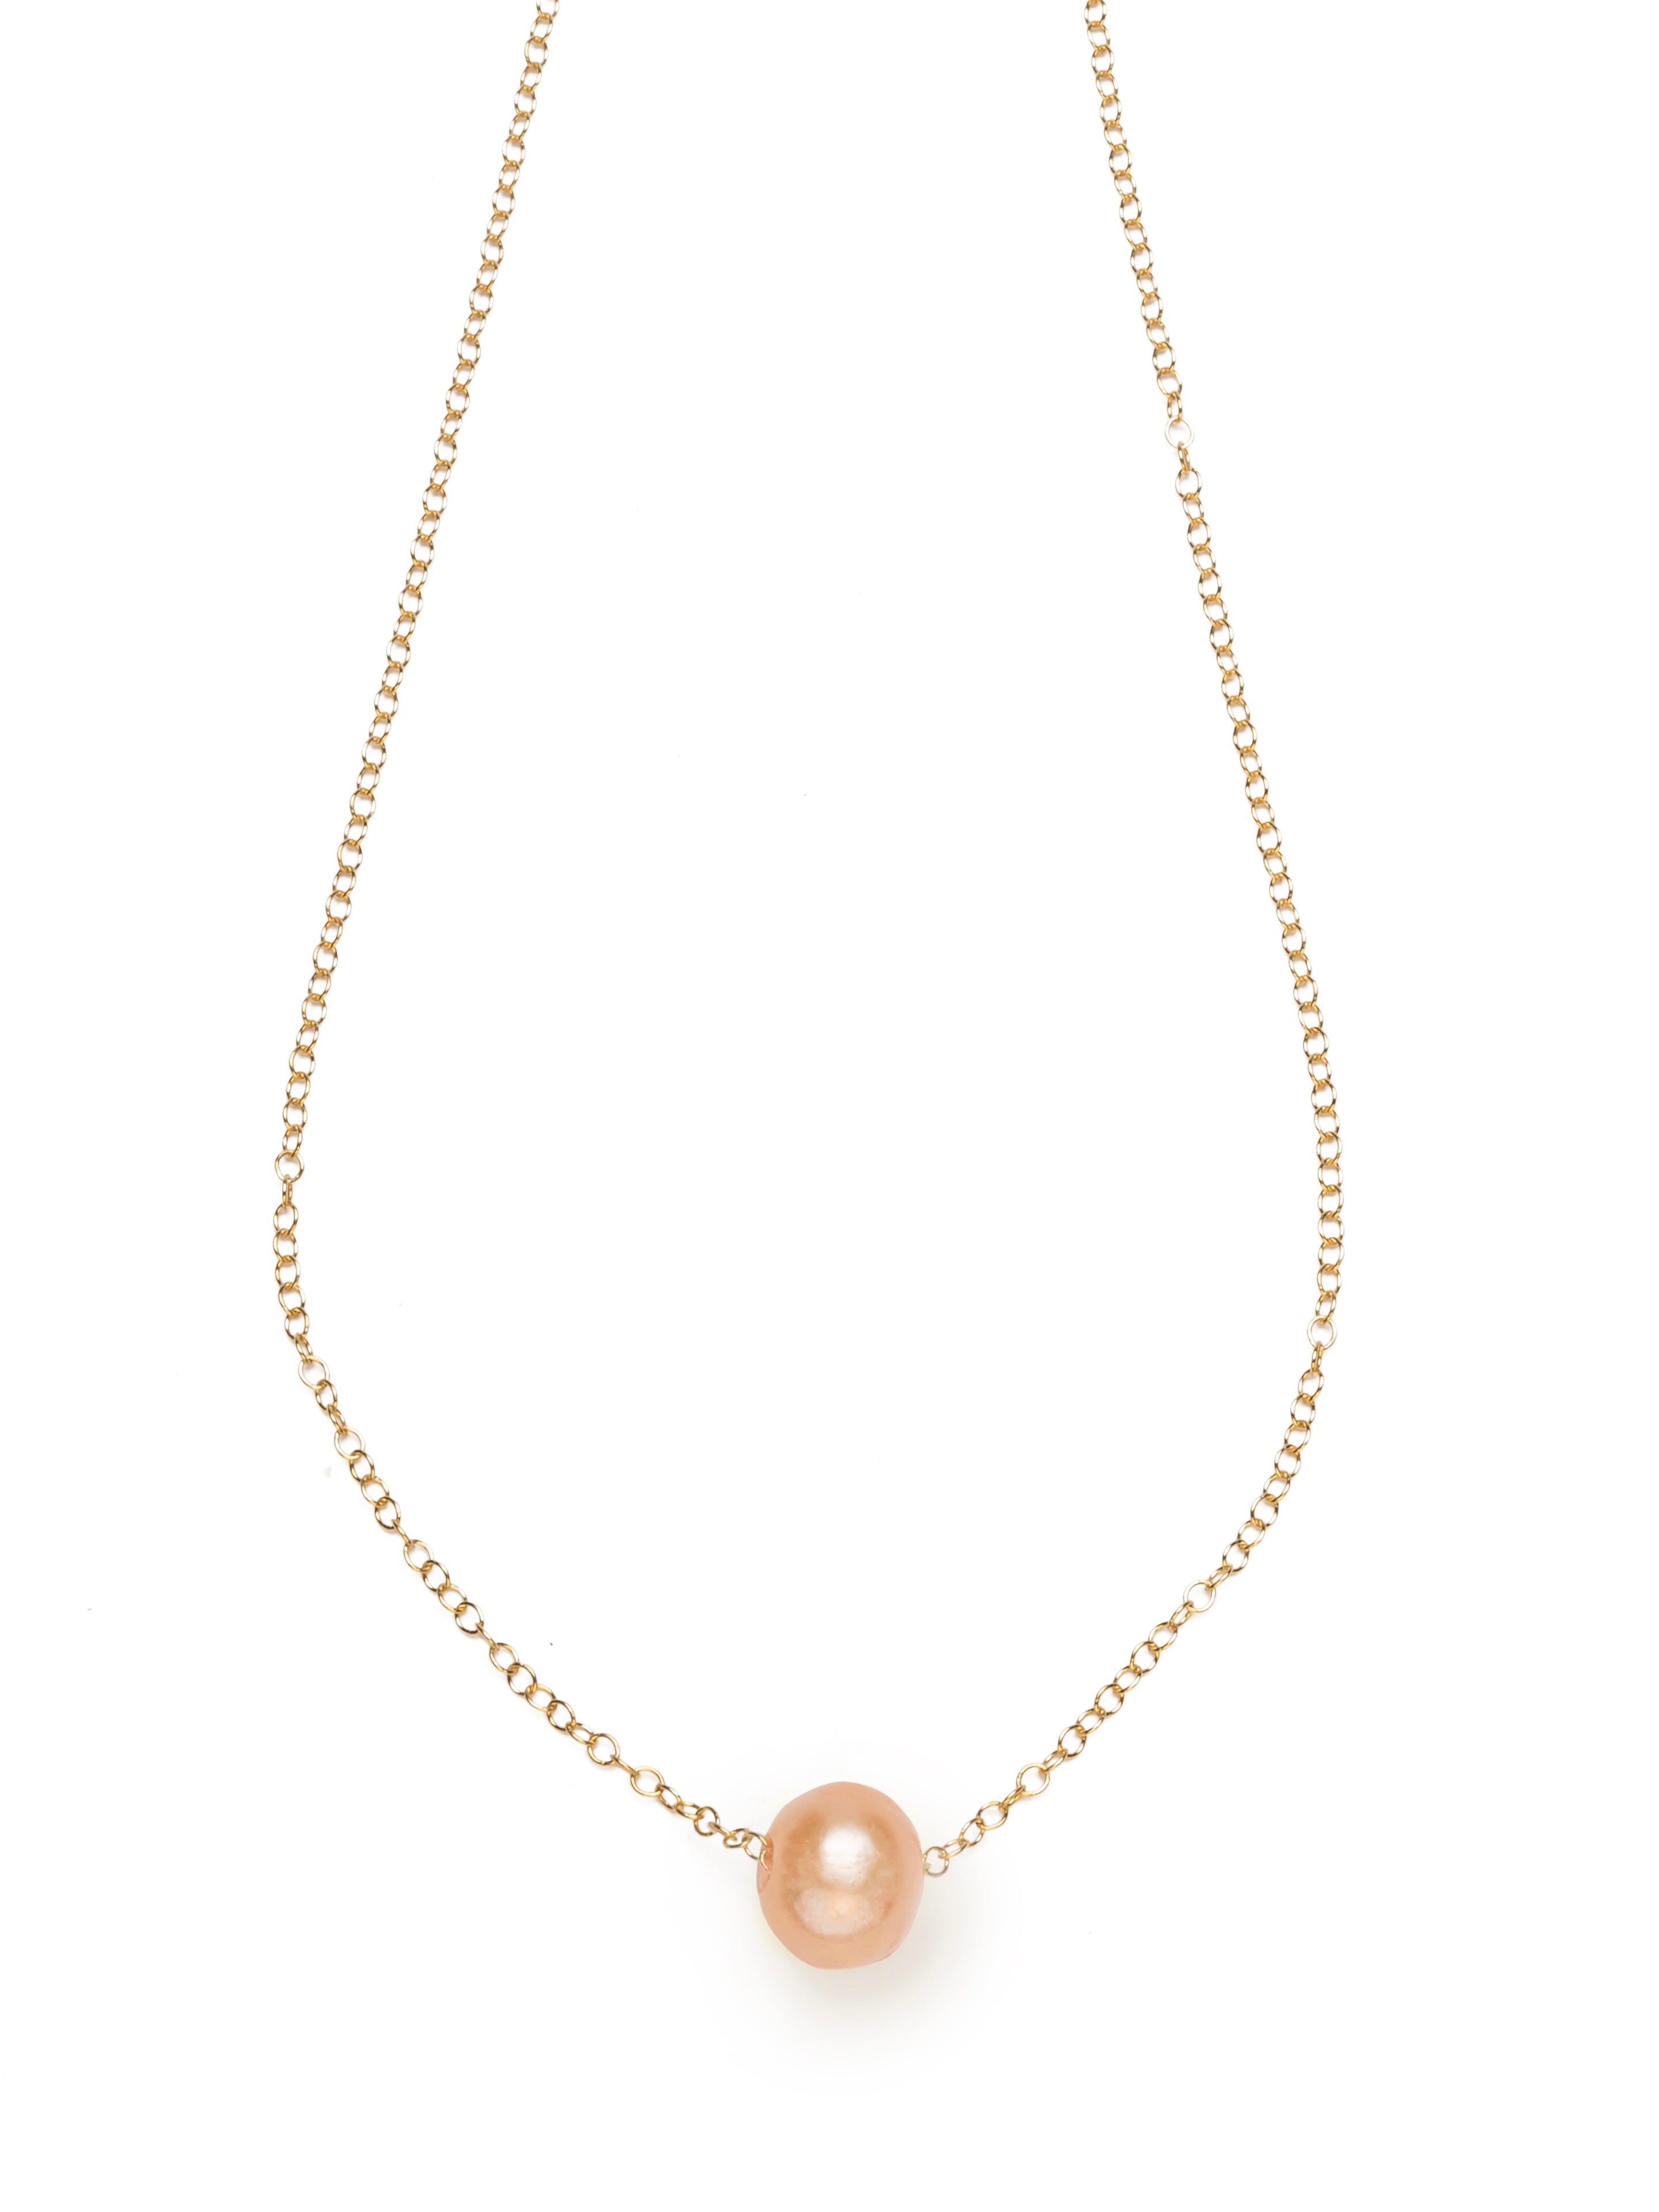 20% to Breast Cancer Hawaii — Pink-Peach Freshwater Pearl Floating necklace